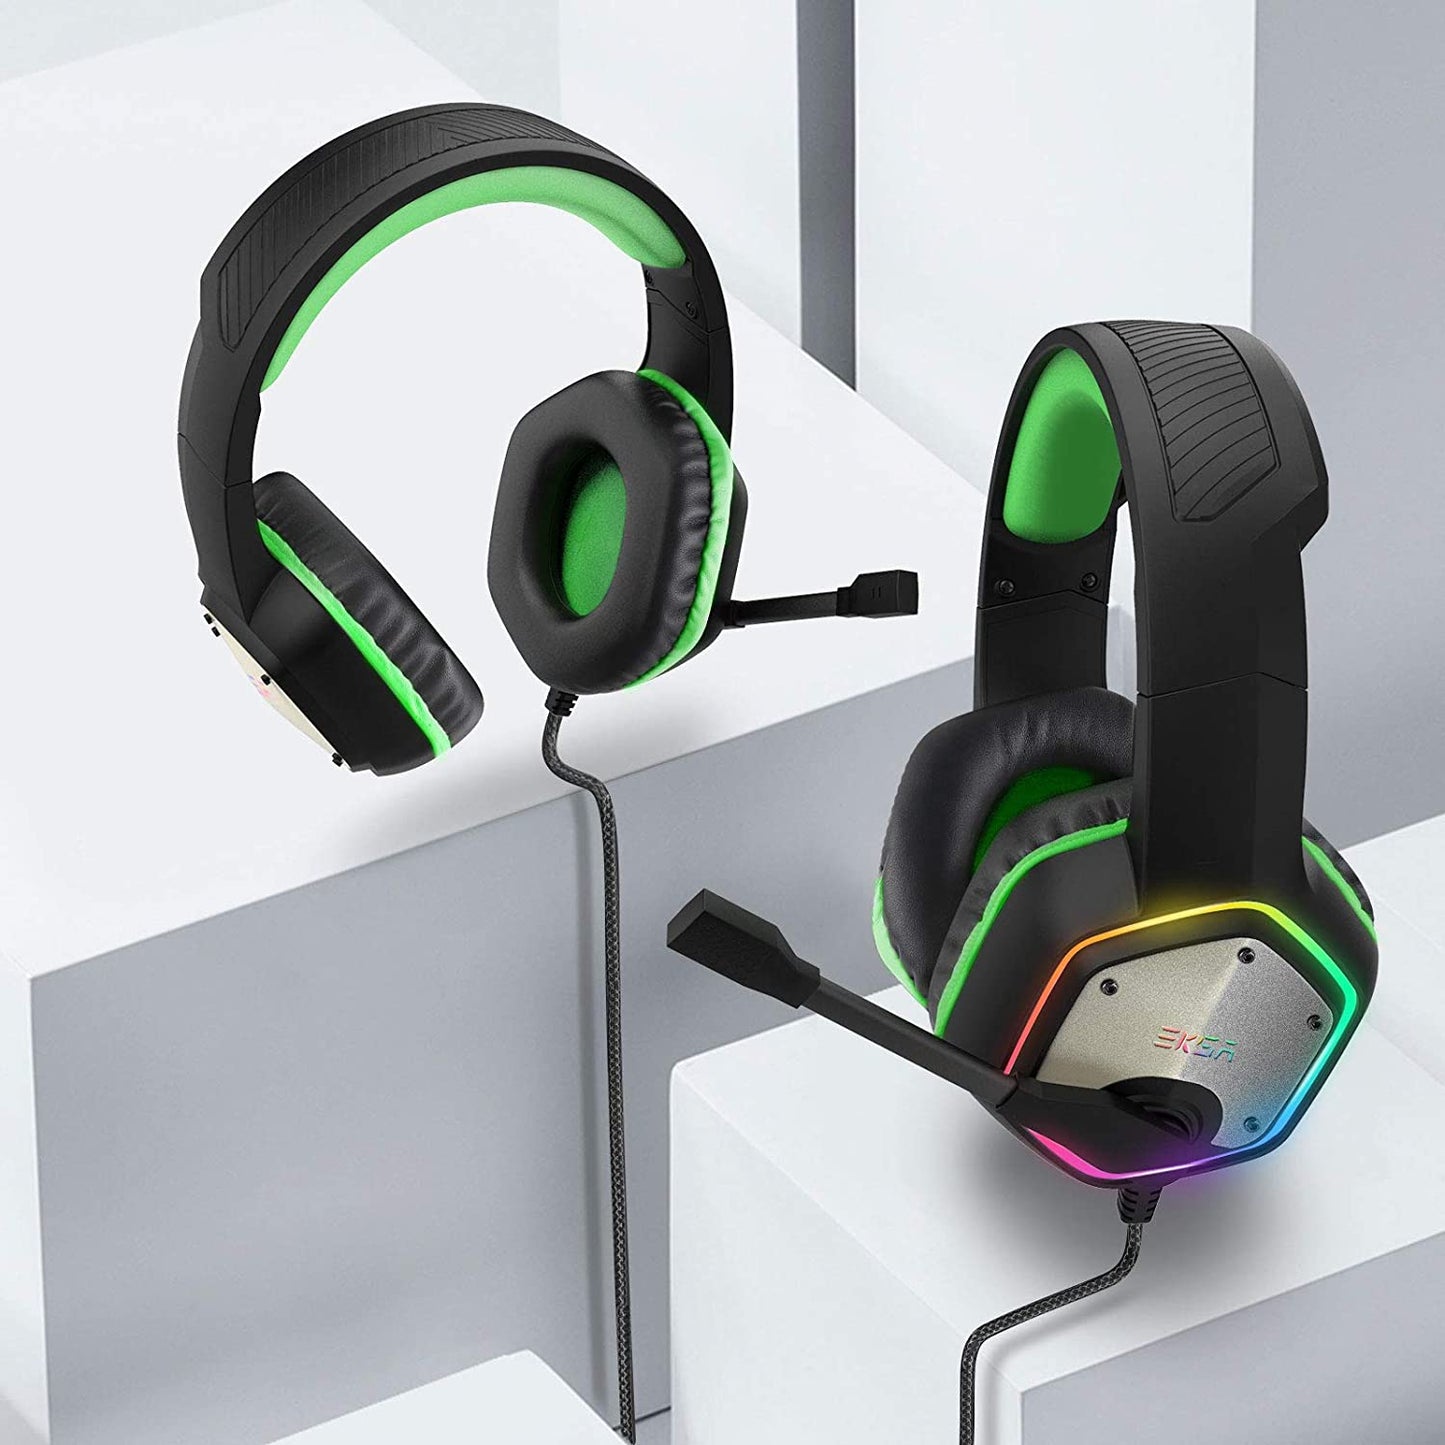 EKSA E1000 7.1 Surround Sound Gaming Headset With Microphone For PS4/Xbox-One/PC Gamer Stereo USB Wired Headphone RGB LED Light Green